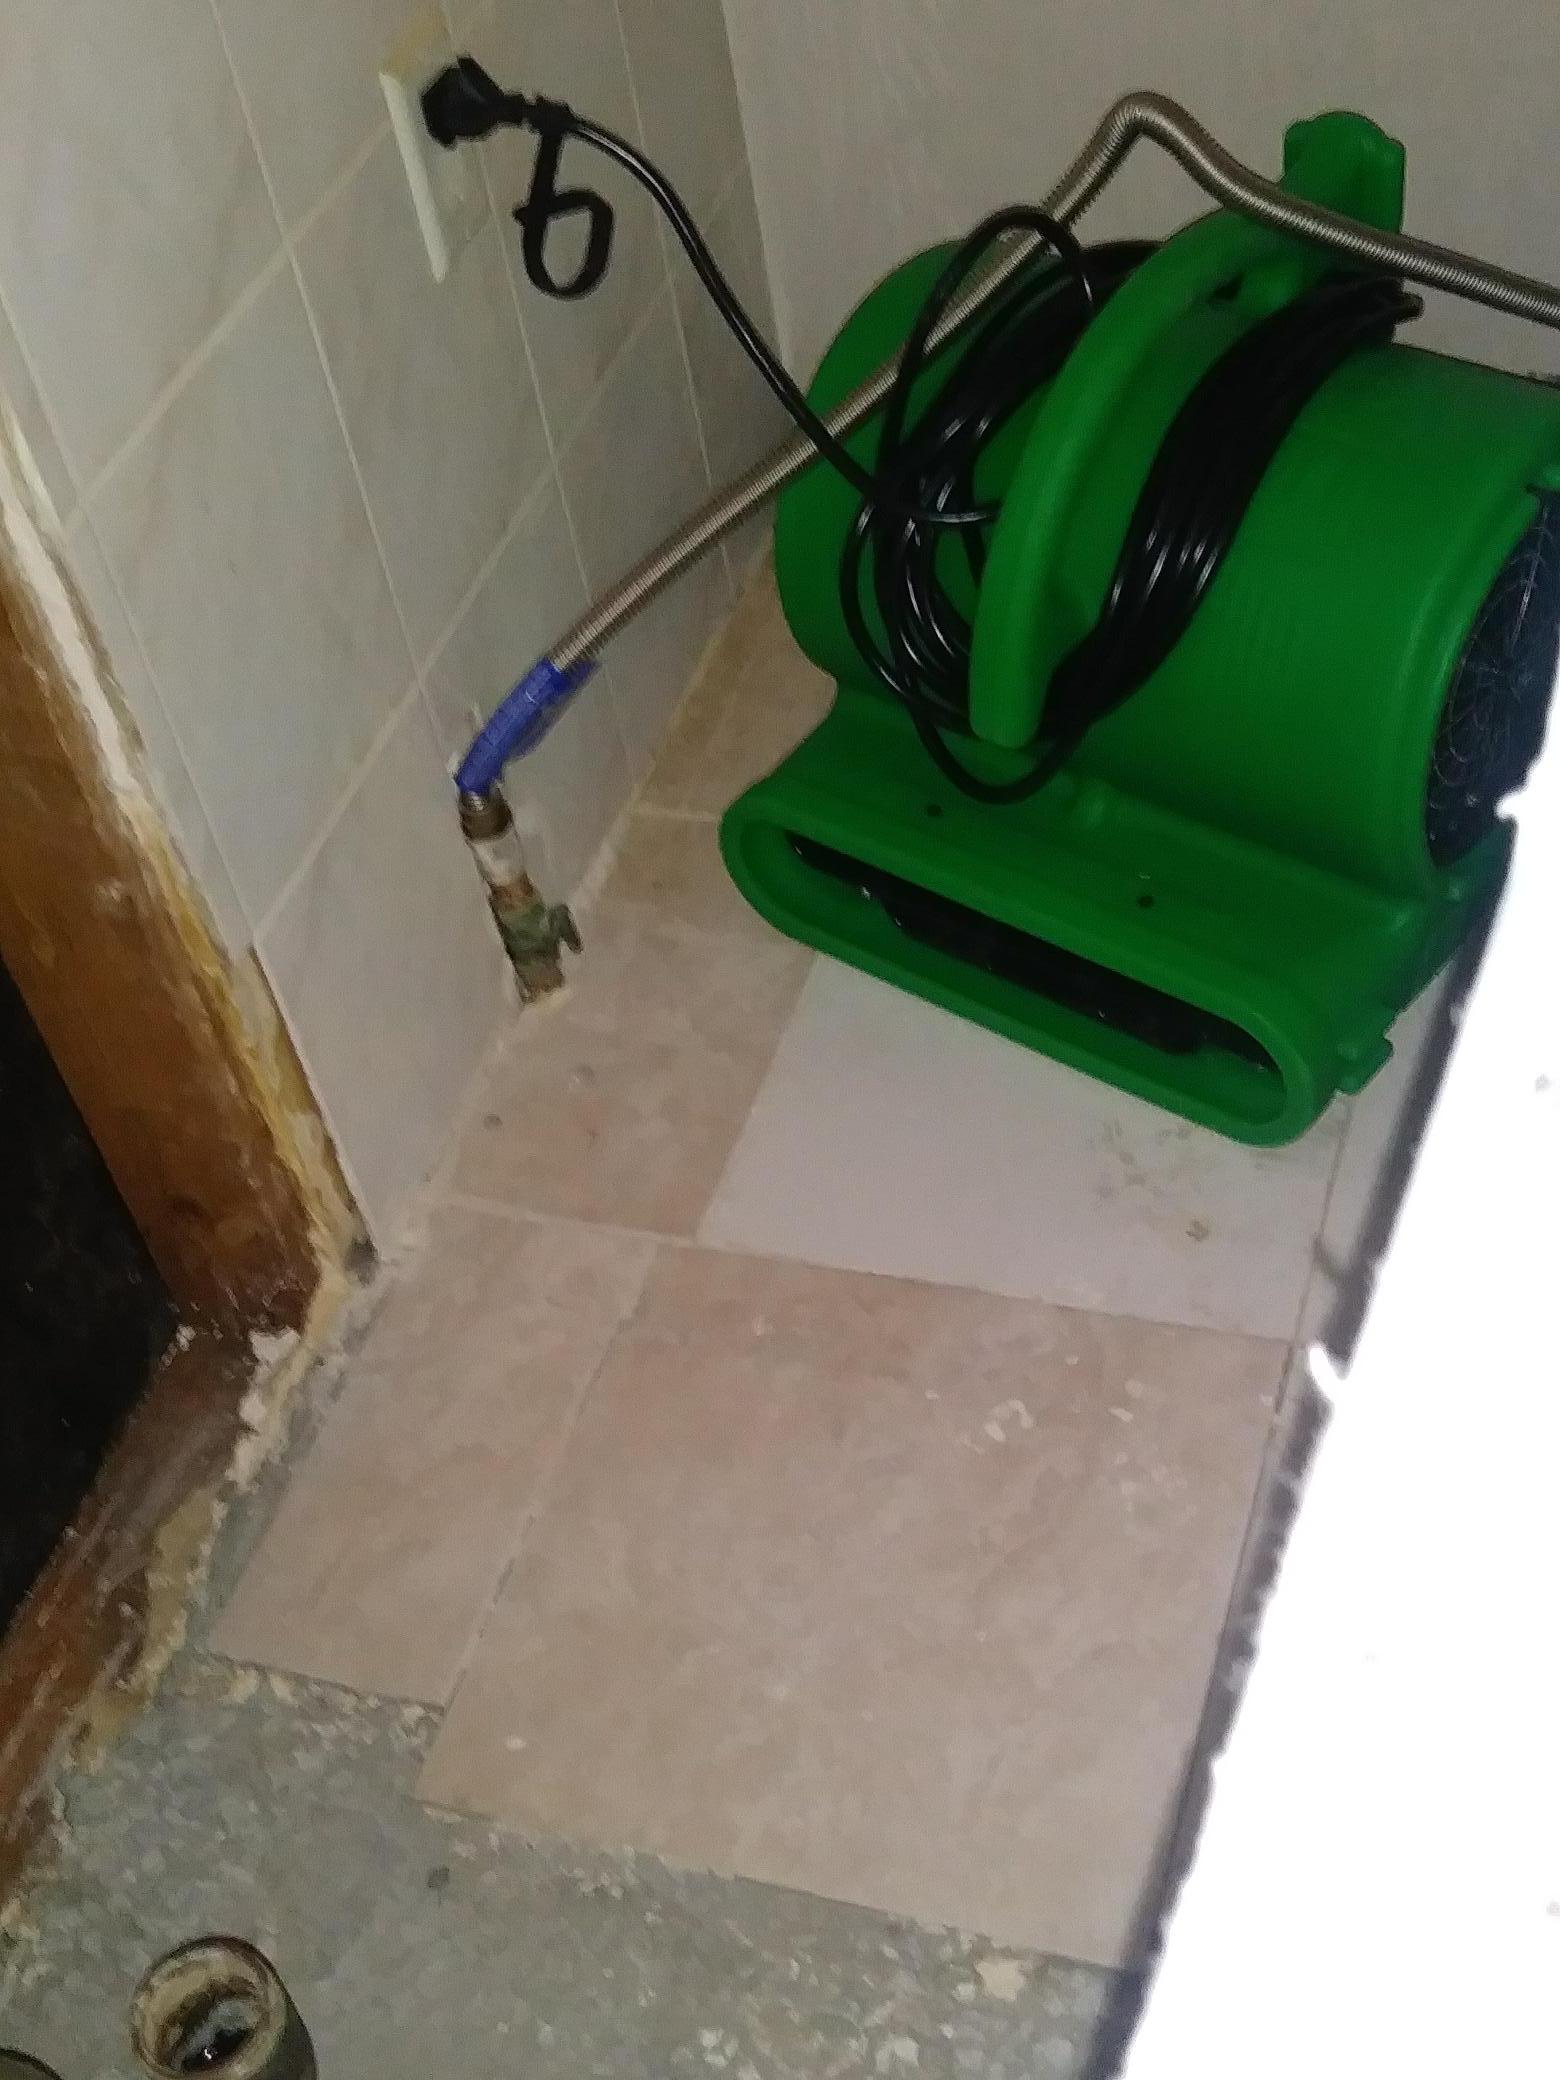 Check out our Water Damage Tips to see what you can do until SERVPRO help arrives.